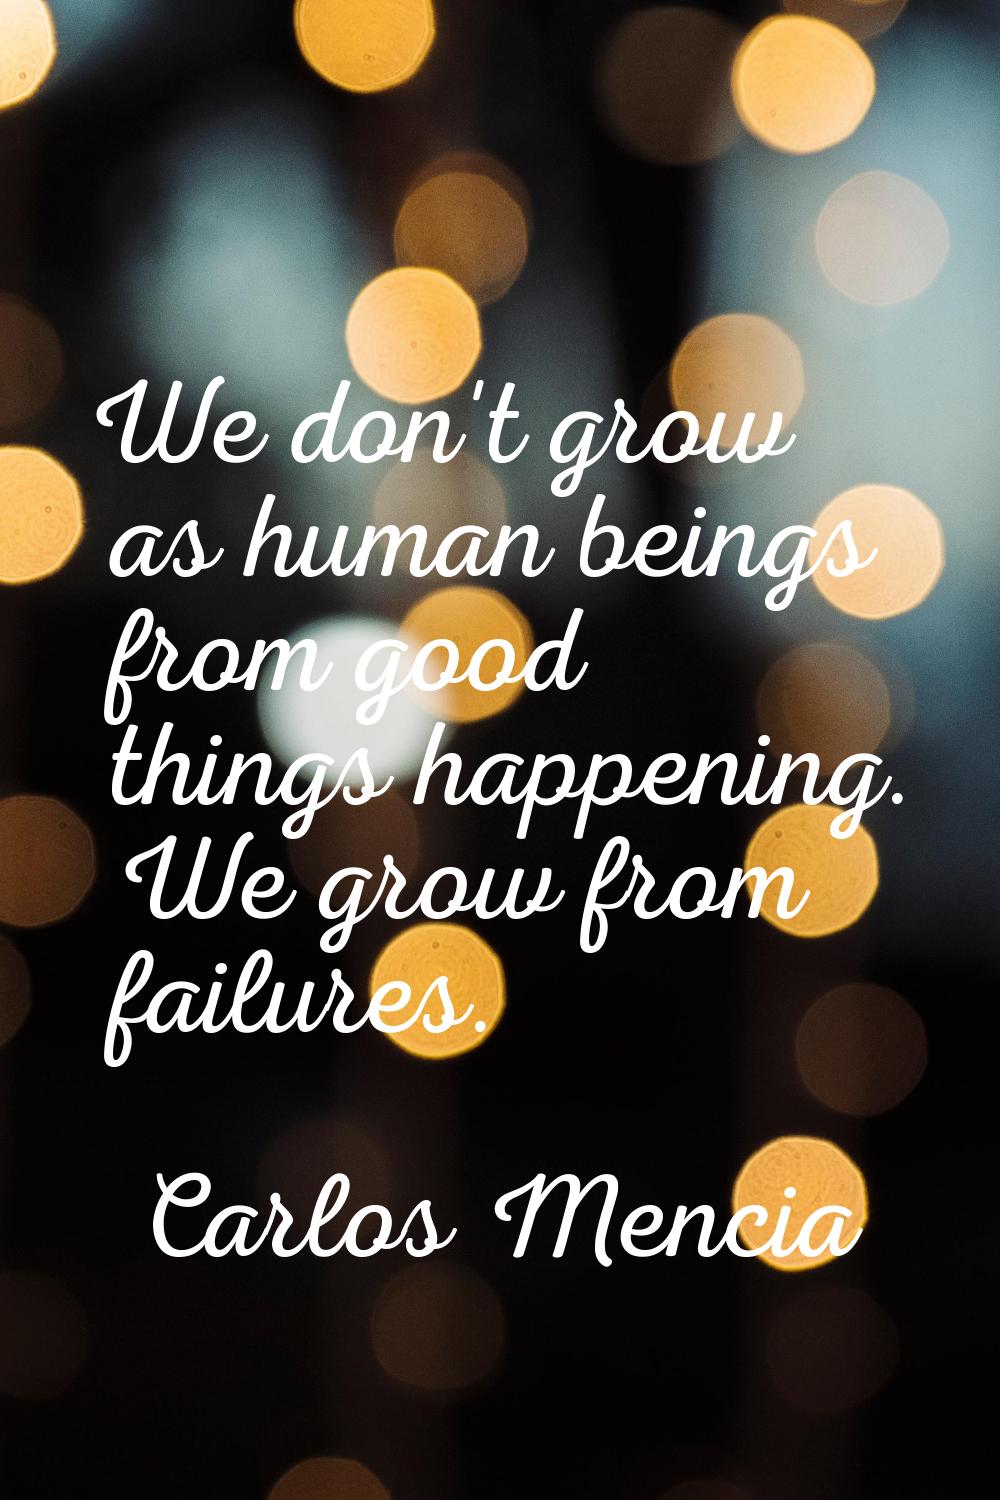 We don't grow as human beings from good things happening. We grow from failures.